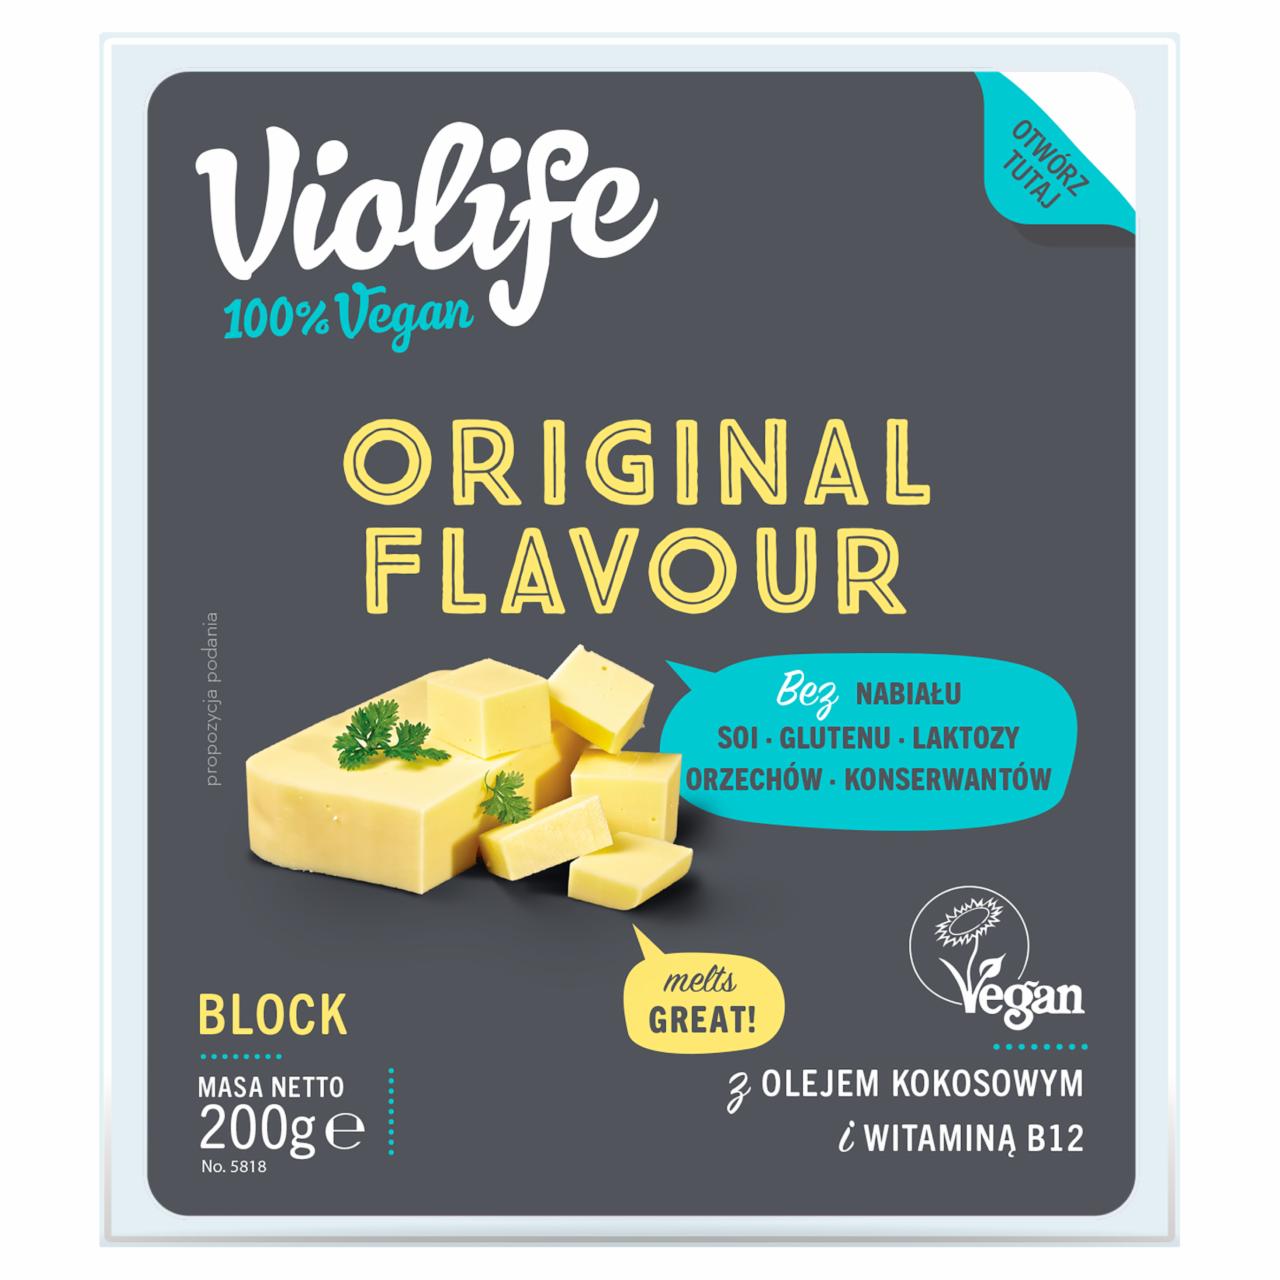 Photo - Violife Original Flavour Block Product Based on Coconut Oil 200 g